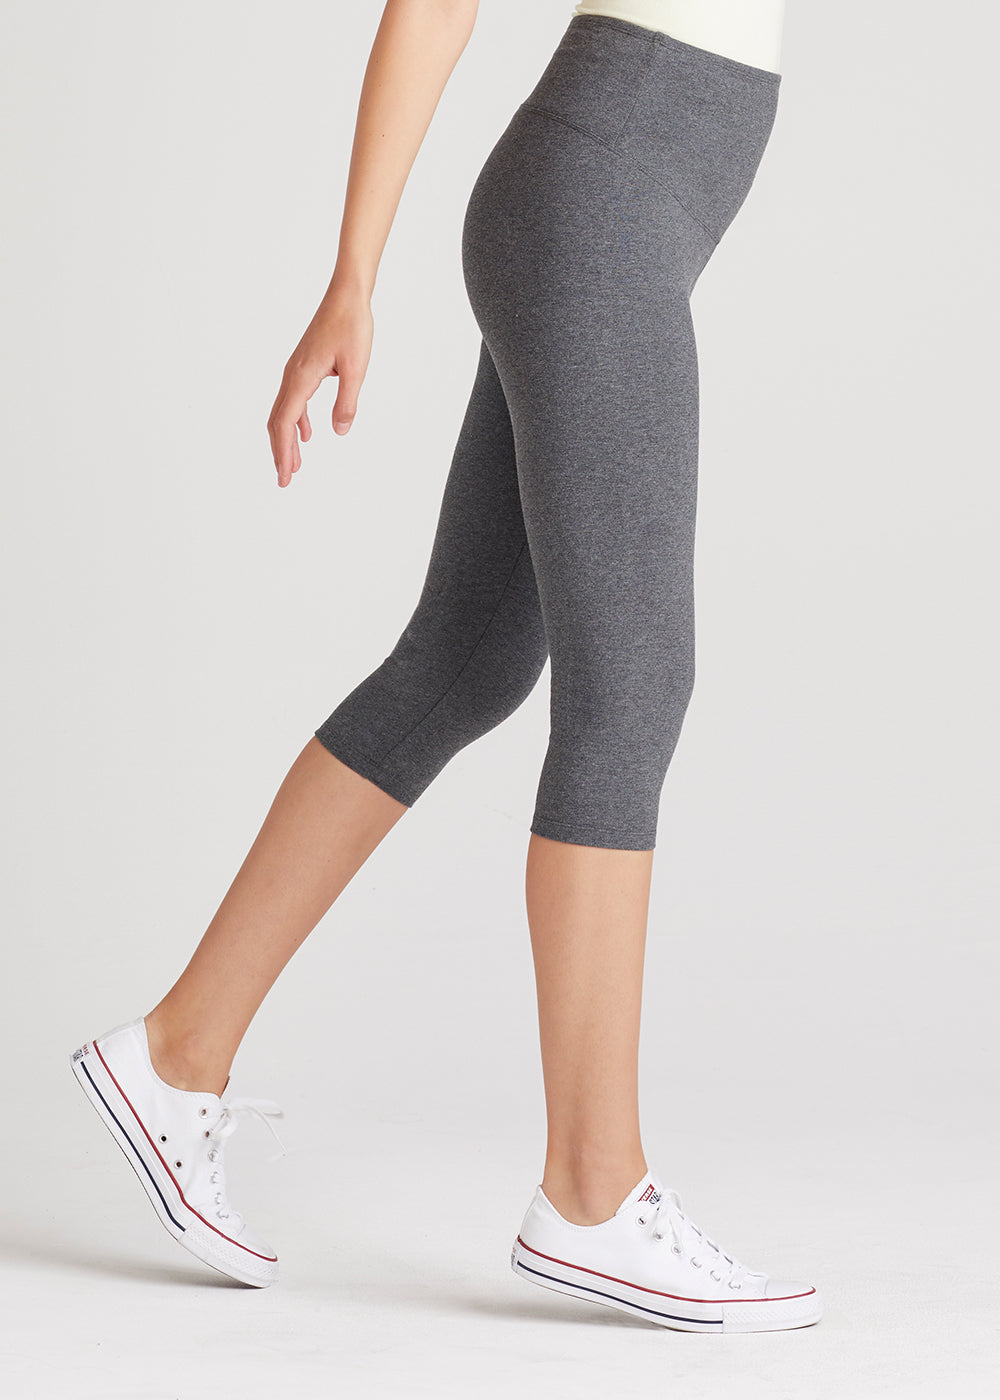 Talia Cropped Capri Shaping Legging - Cotton Stretch from Yummie in Heather Charcoal  - 1